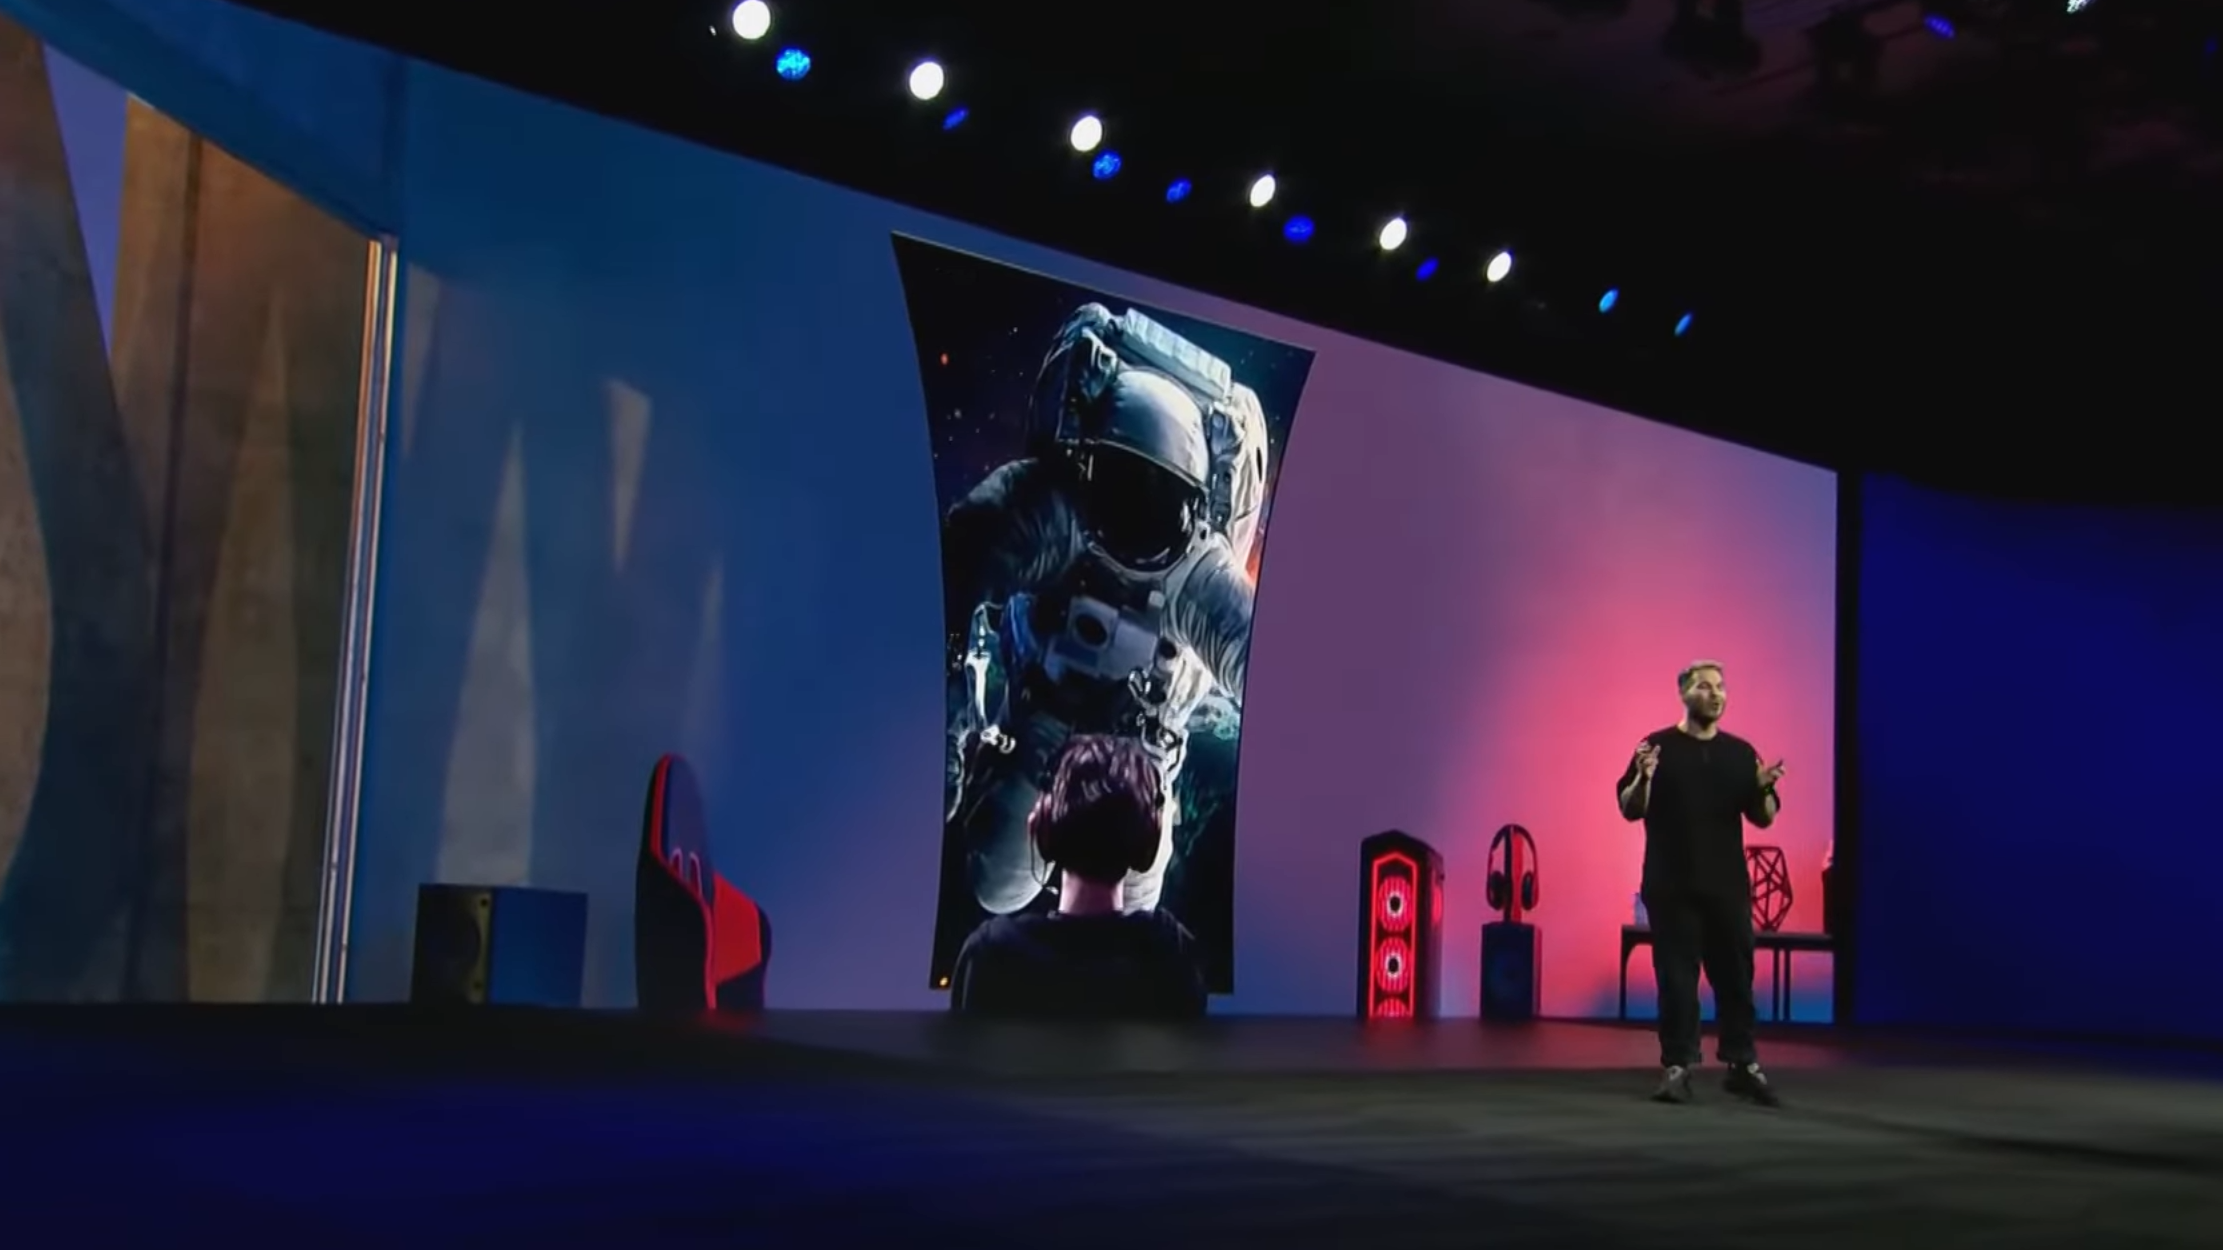 The Samsung Odyssey Ark screen appears on stage at a Samsung CES 2022 event.